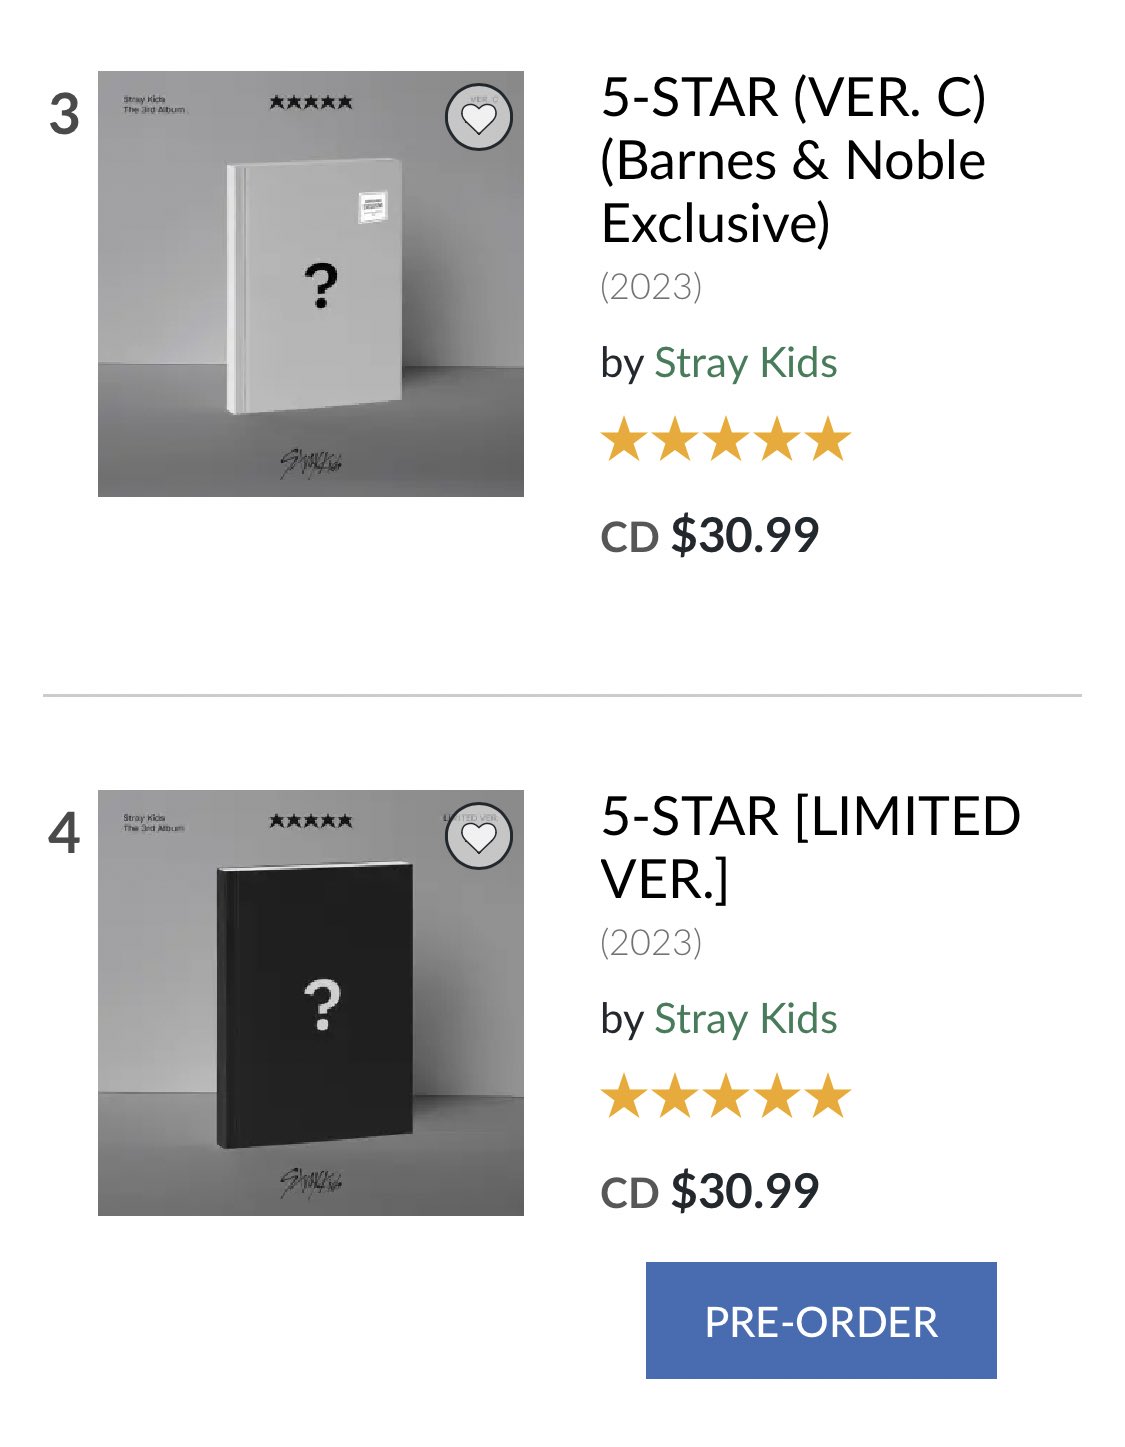 5-STAR (VER. A) (Barnes & Noble Exclusive) by Stray Kids, CD